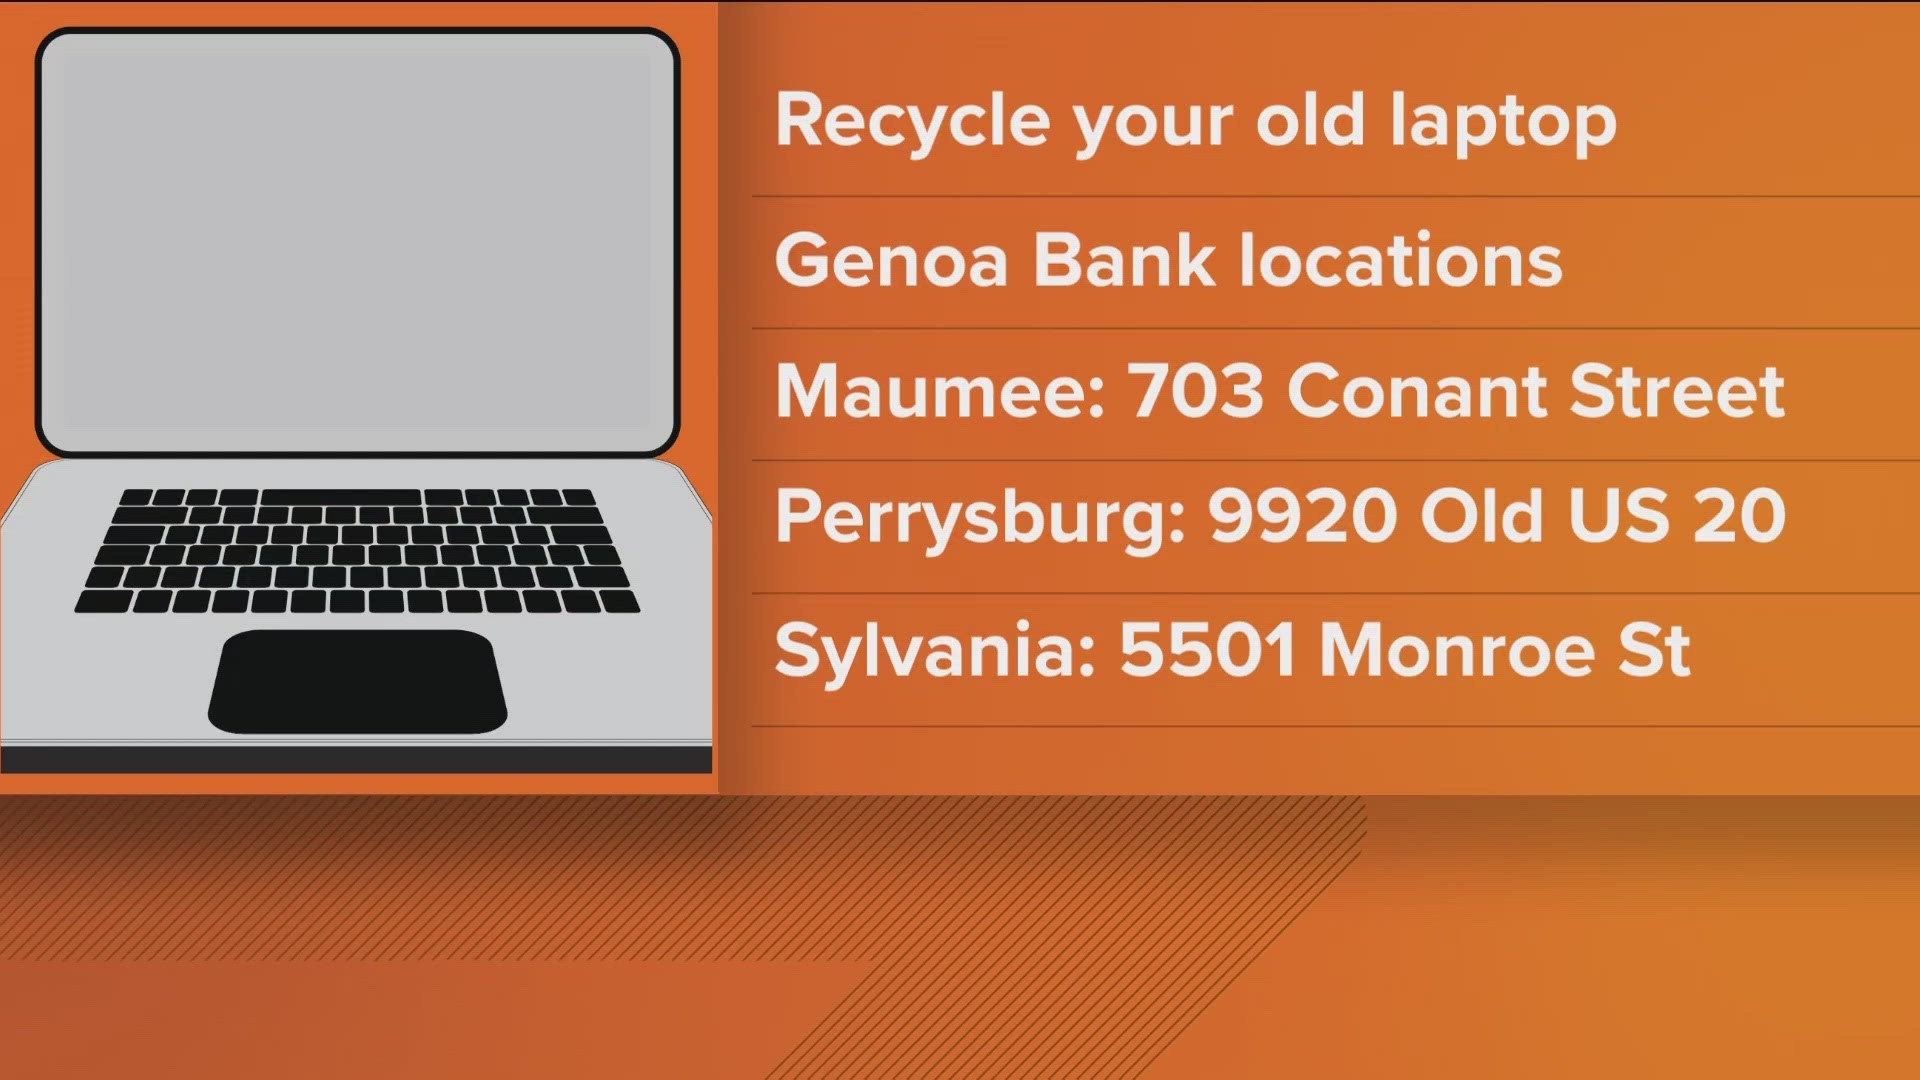 AIM Ecycling and Genoa Bank are teaming up to offer an easy solution to keep laptops out of landfills and get them into the hands of students.